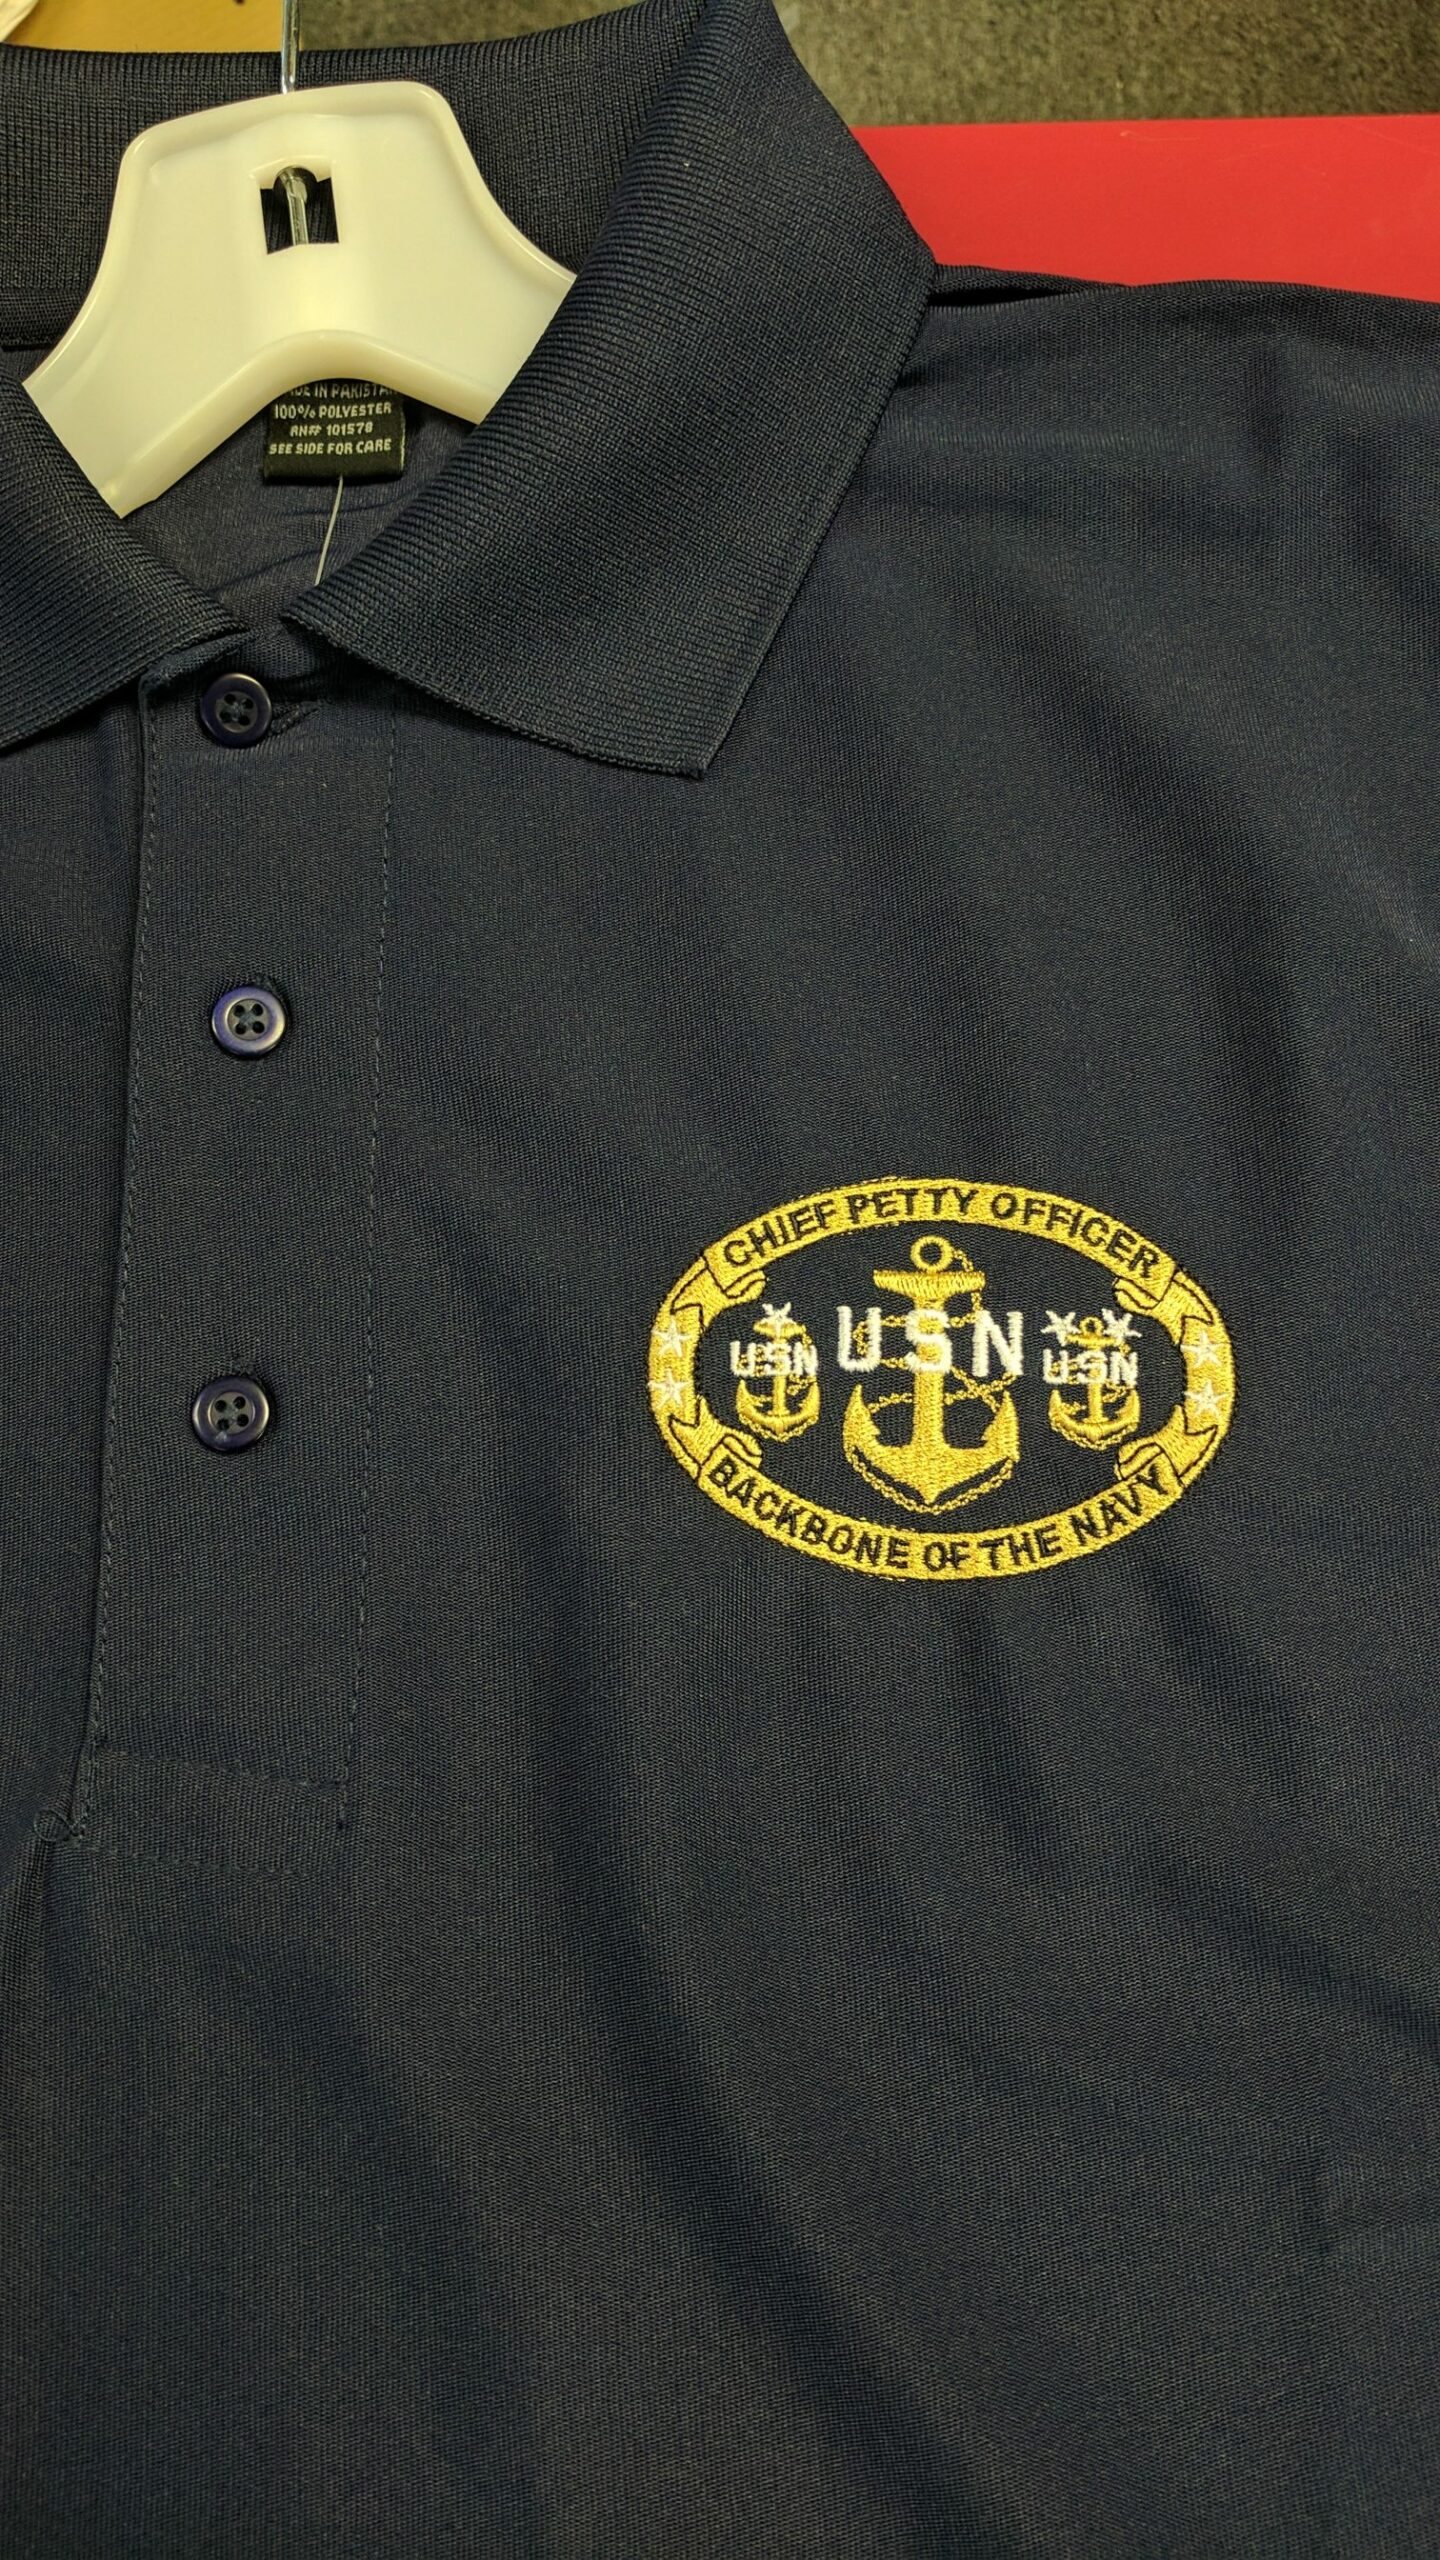 CPO NIKE SHIRT - Hines DTF / DTG AND CUSTOM PRINTING & Embroidery